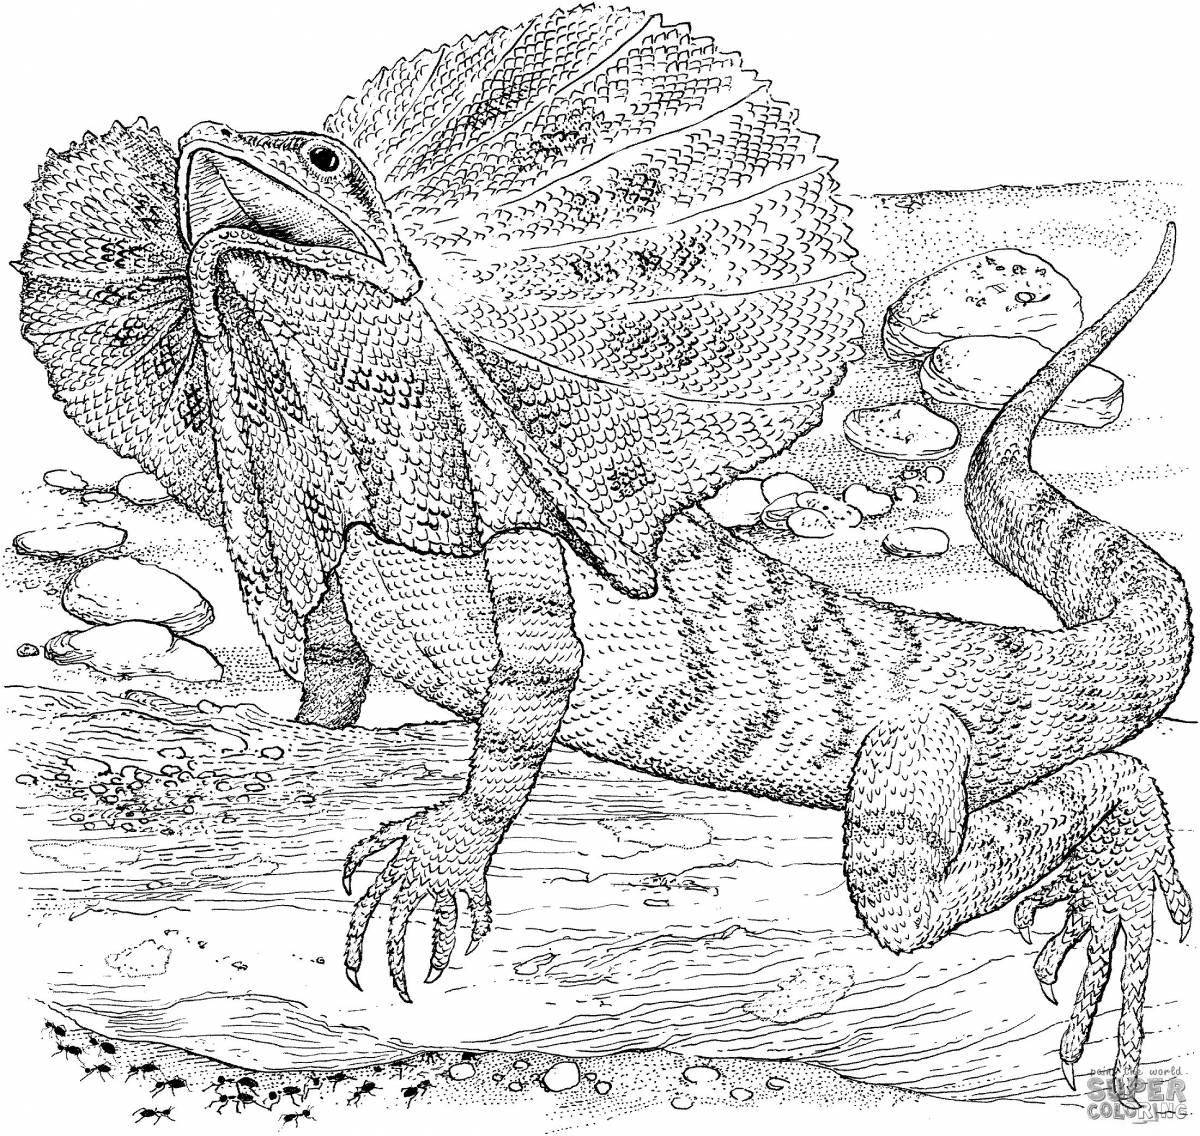 Fabulous reptile coloring pages